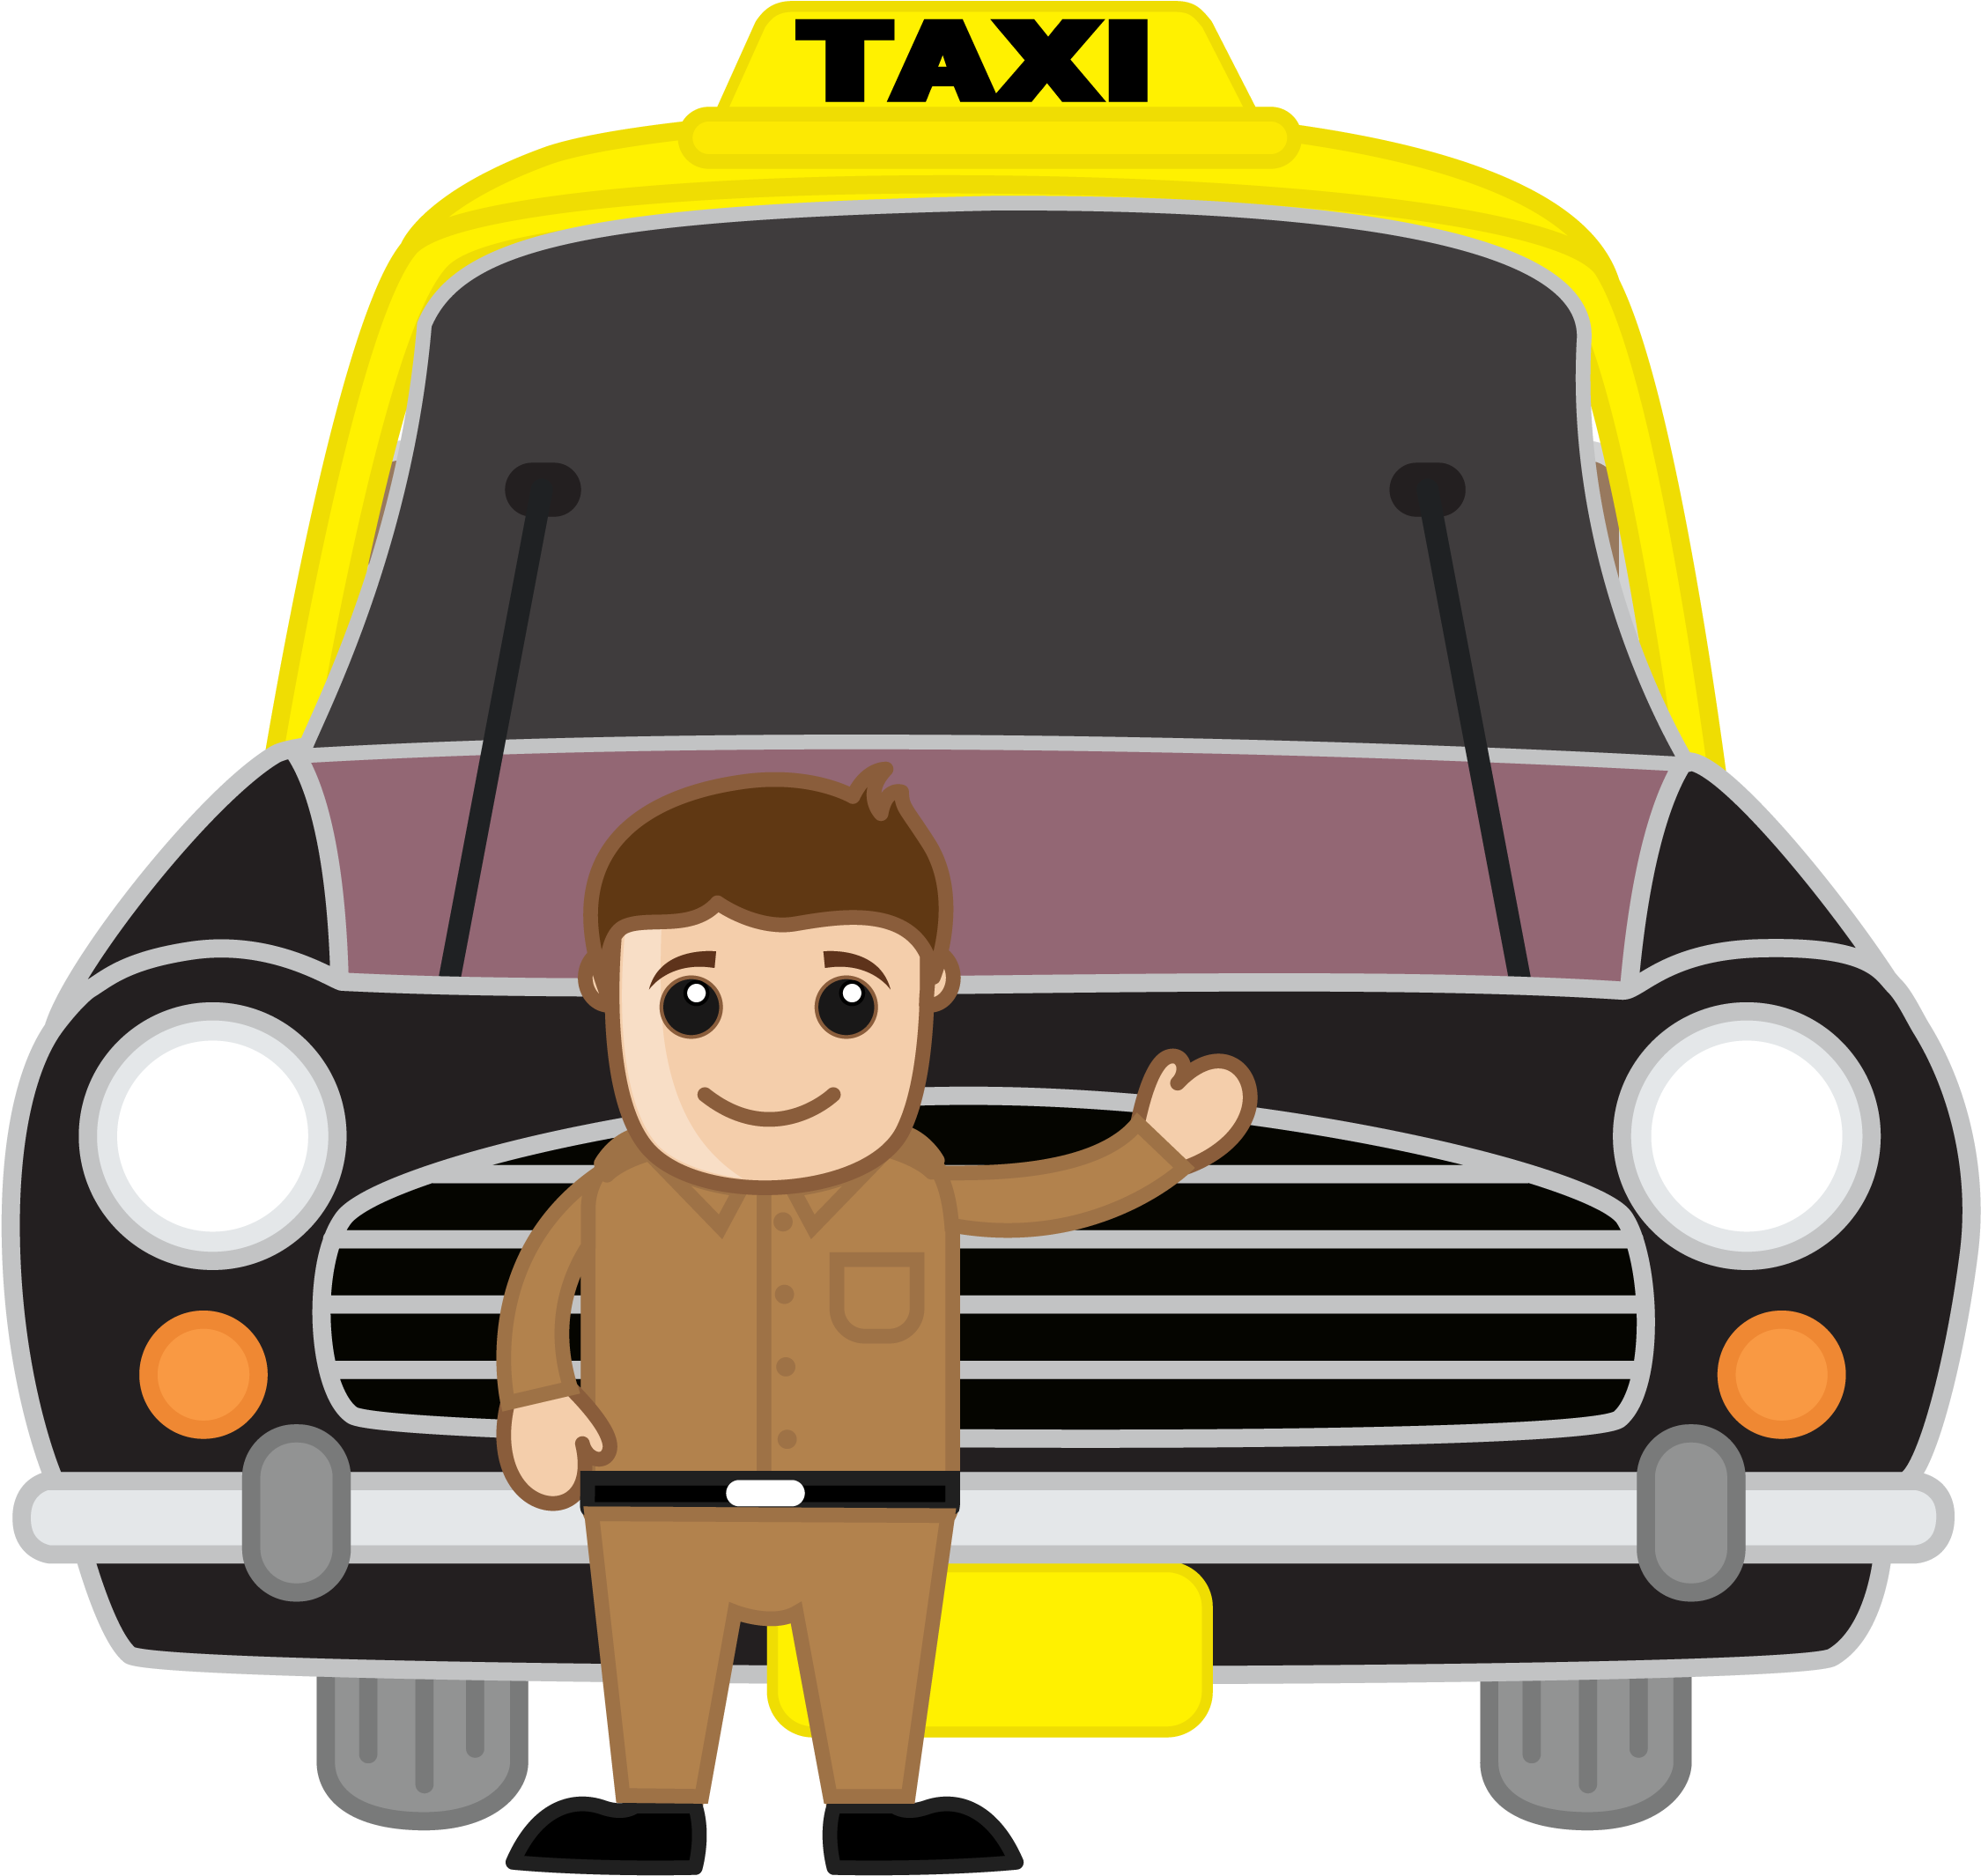 Taxi Driver PNG Image HD